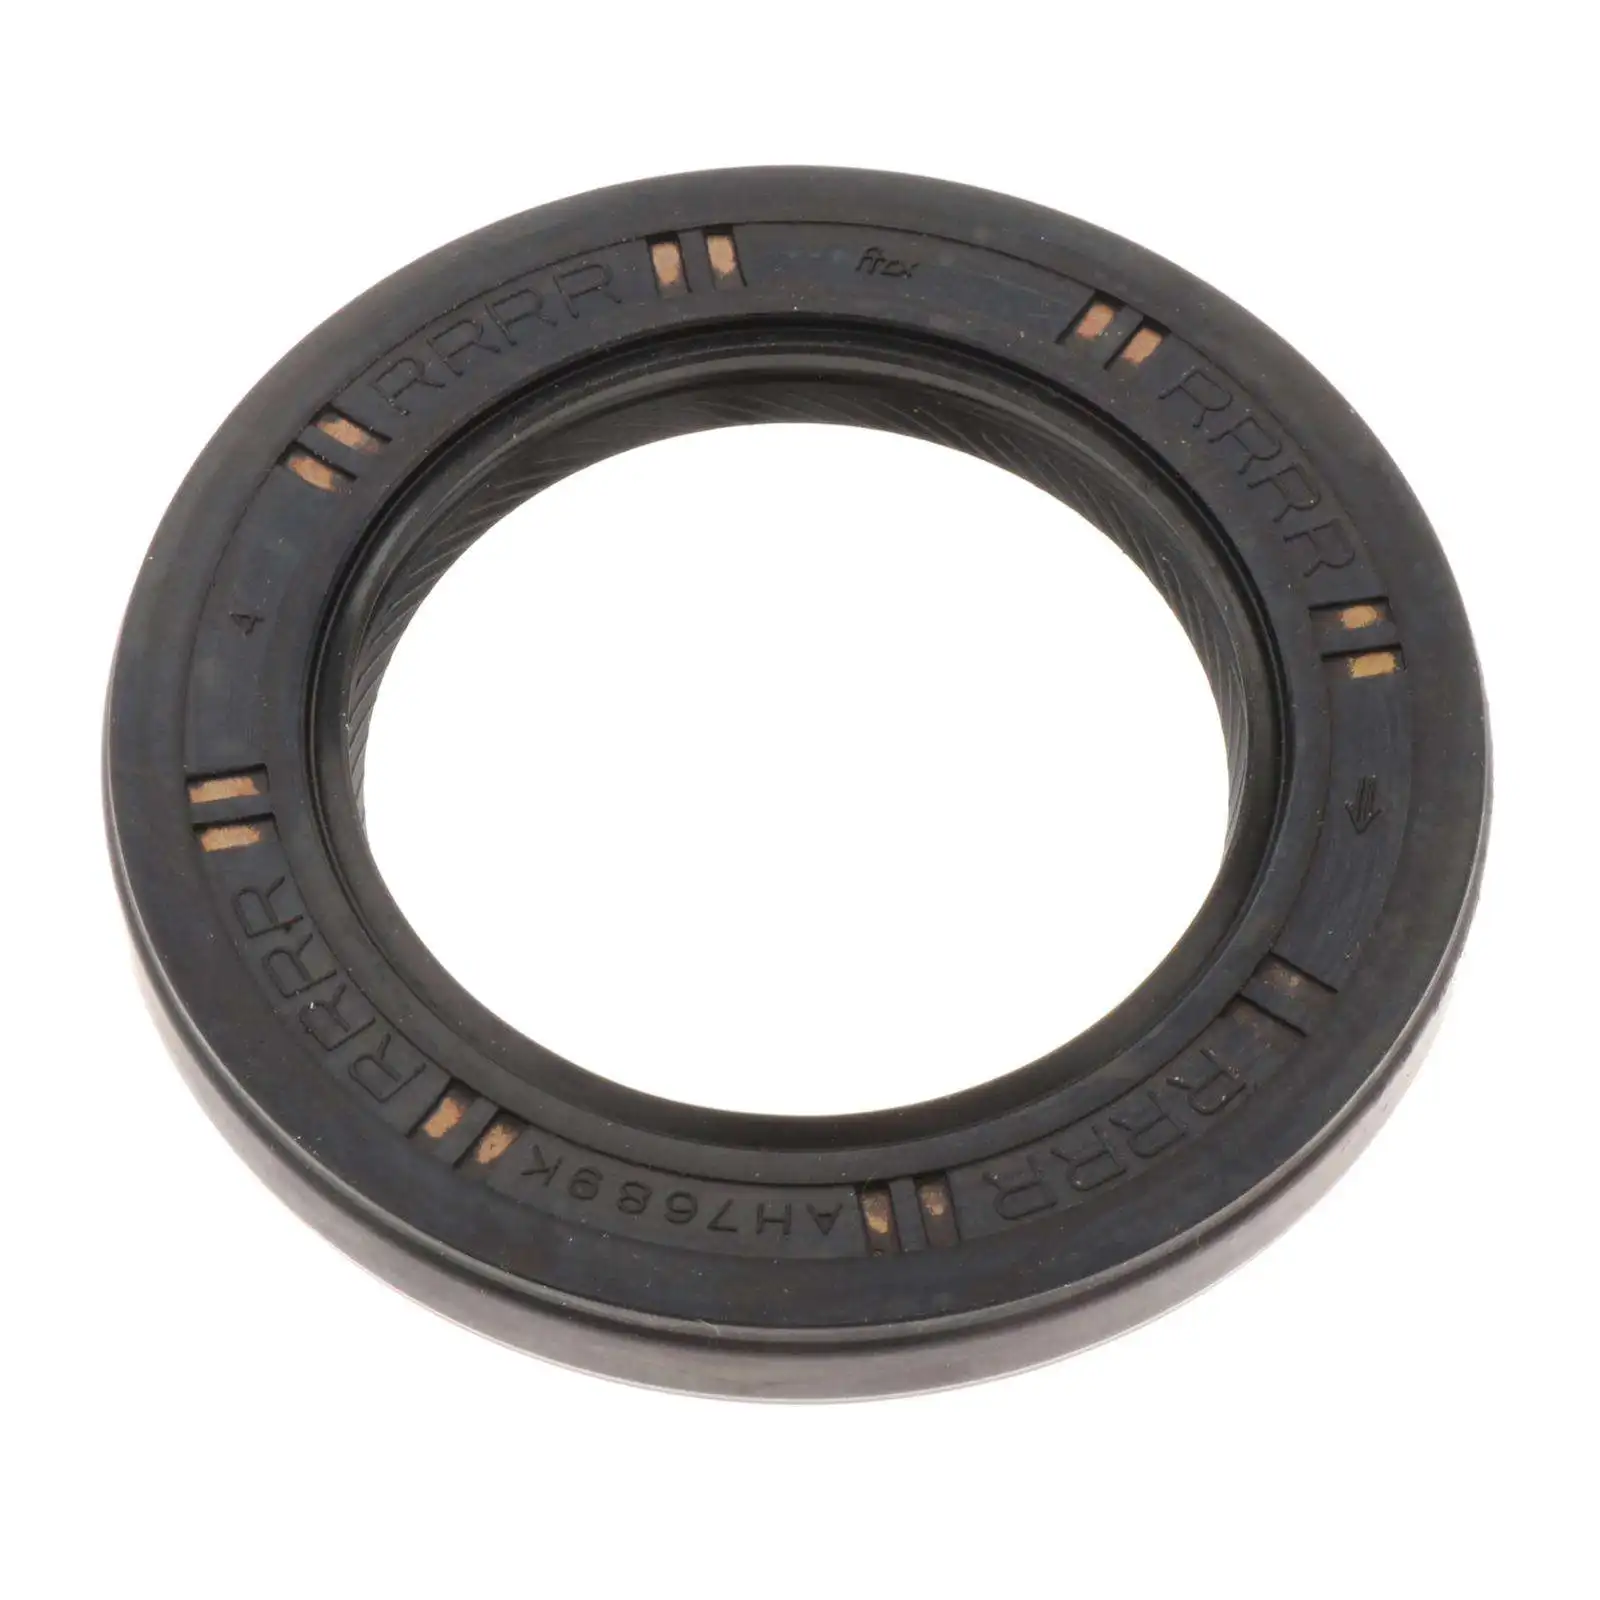 

BCLA MFKA RE4 CVT Transmission Front Oil Seal Rubber Shaft Oil Seal for Honda for Accord 2.4 2.0 5 Speed